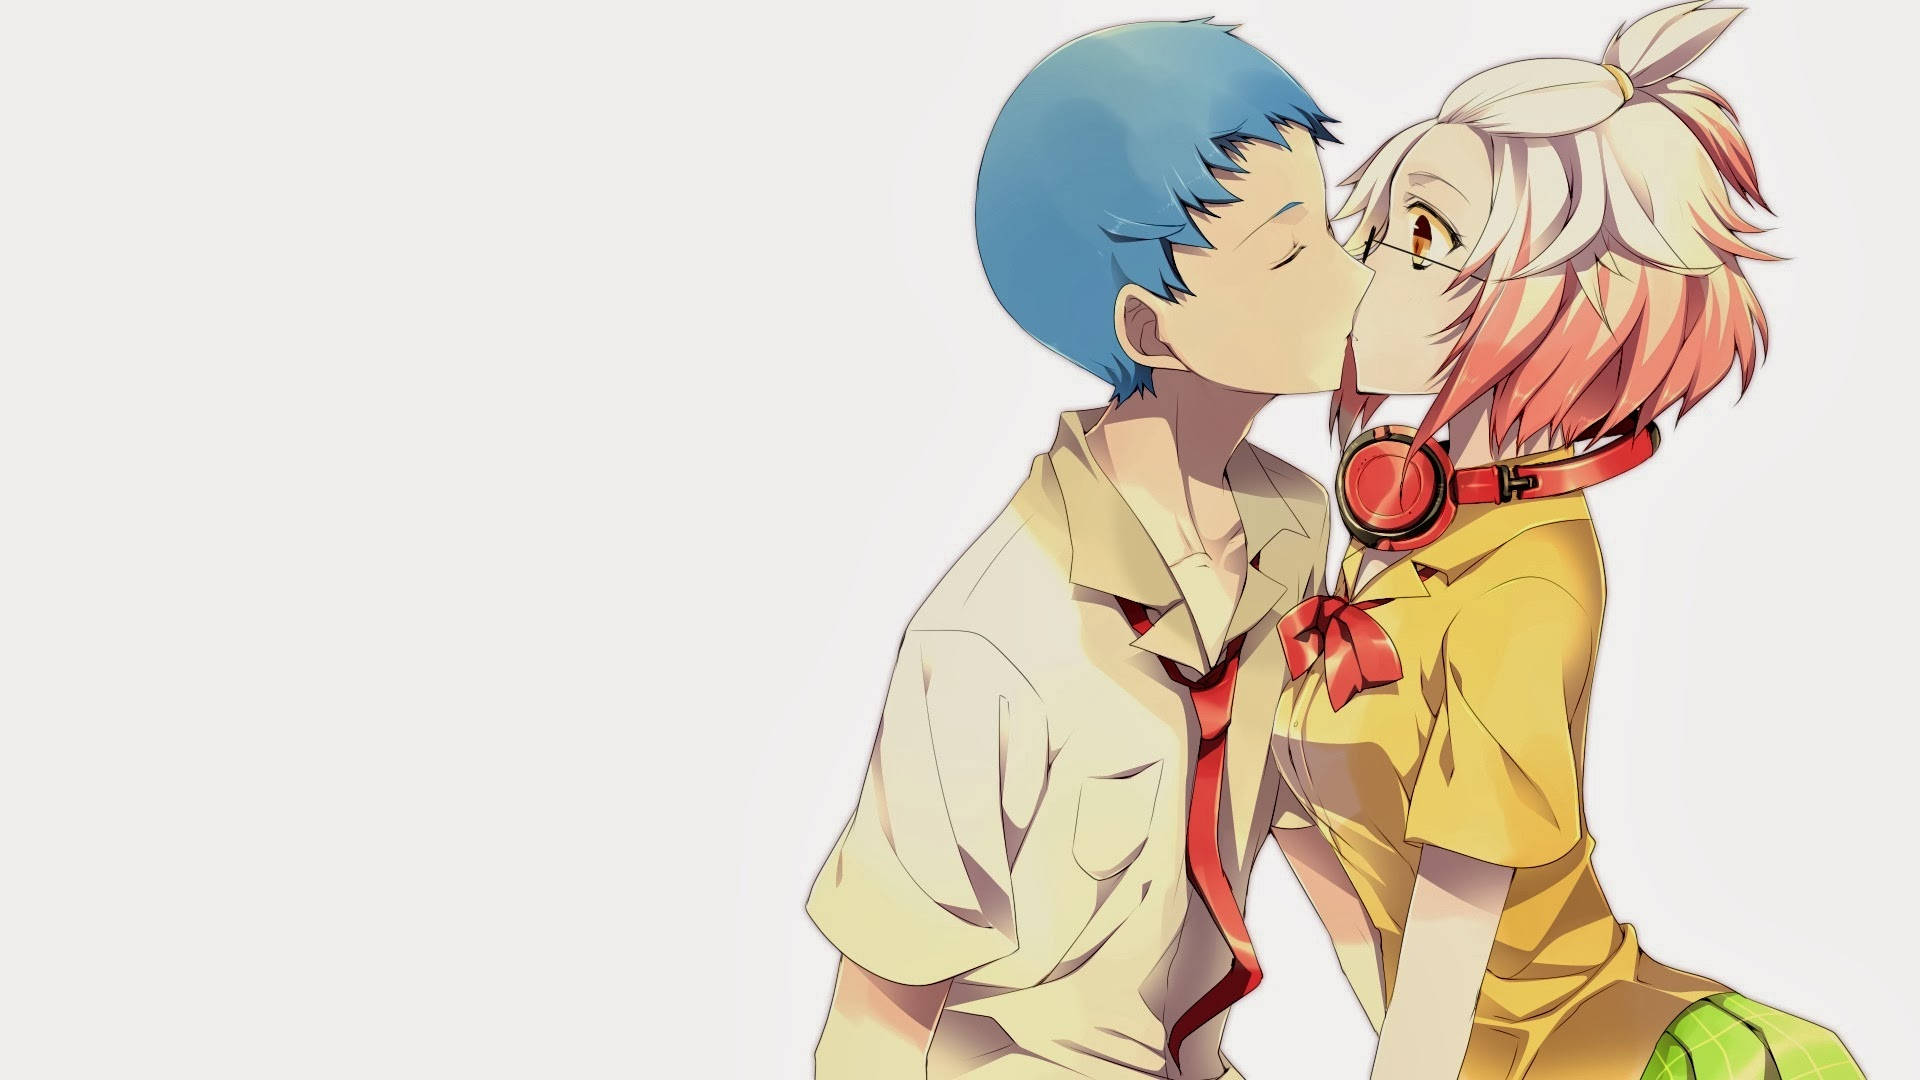 Download Anime Couple Kiss From Tales Of Graces Wallpaper 